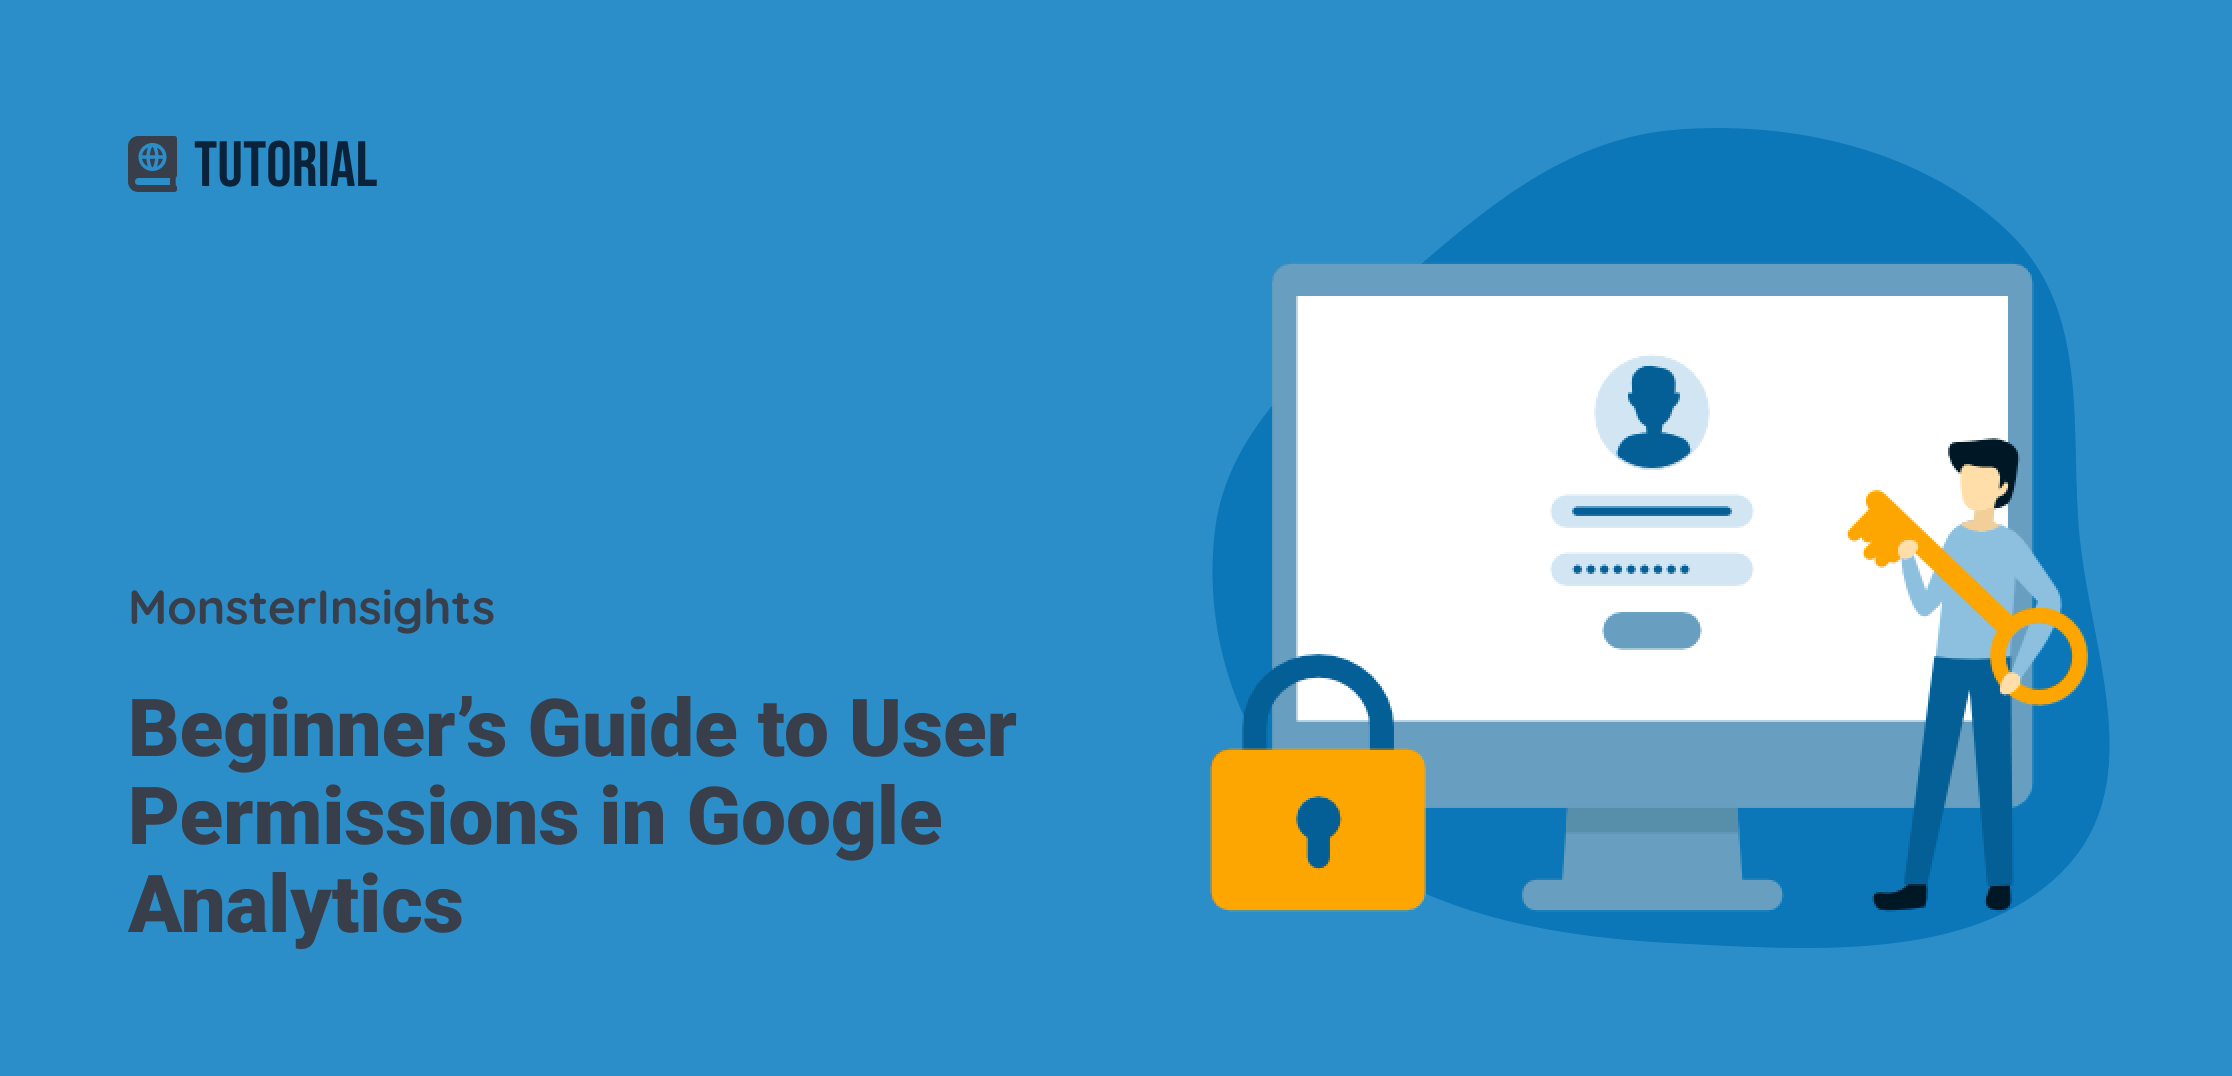 Beginner's Guide to User Permissions in Google Analytics